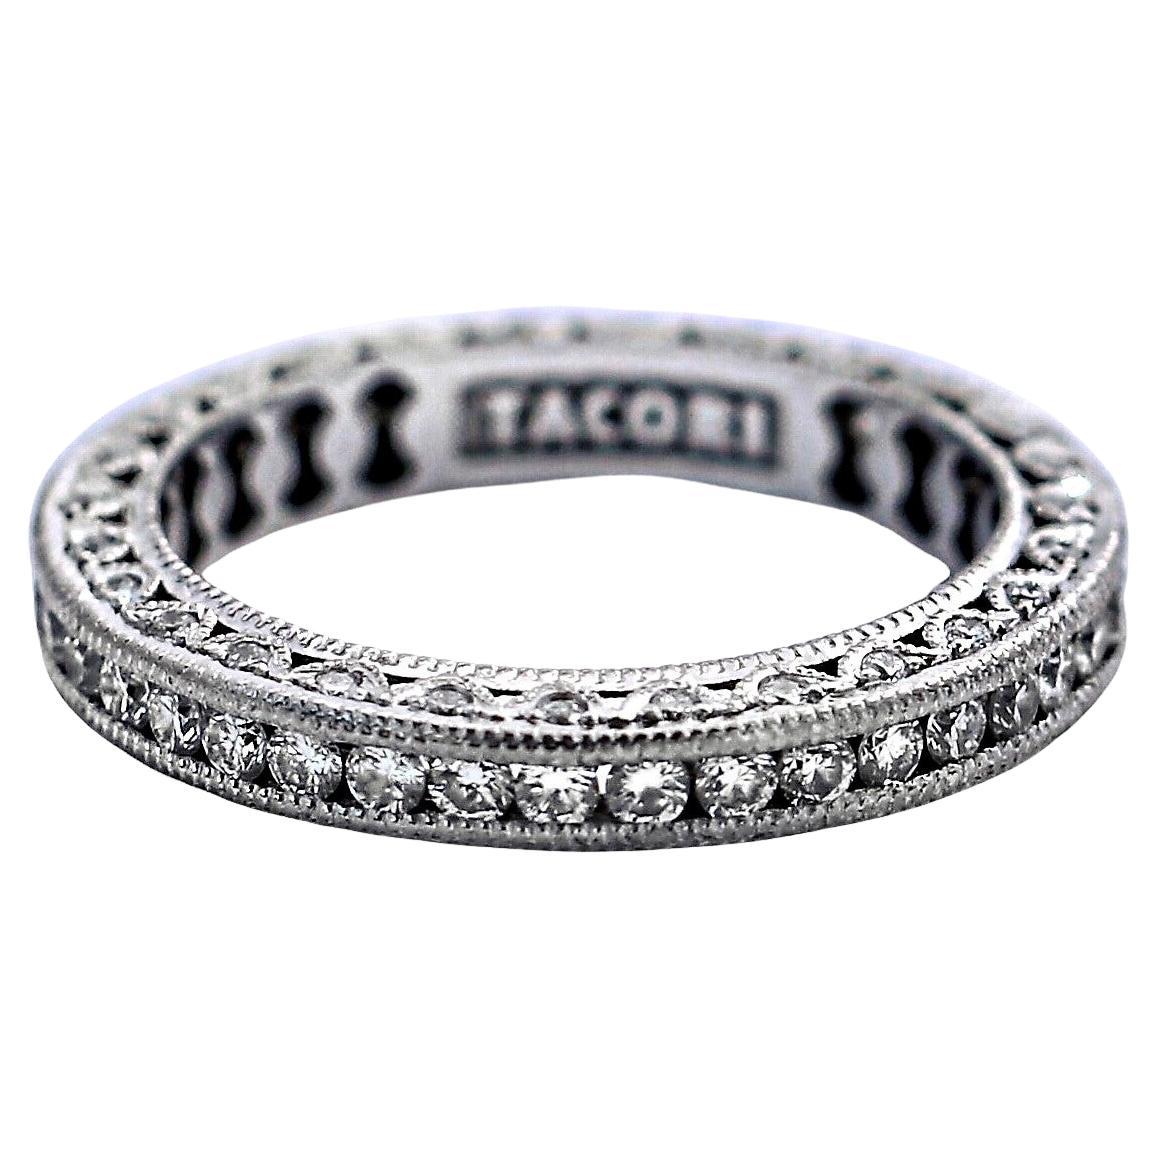 What is a Tacori ring?